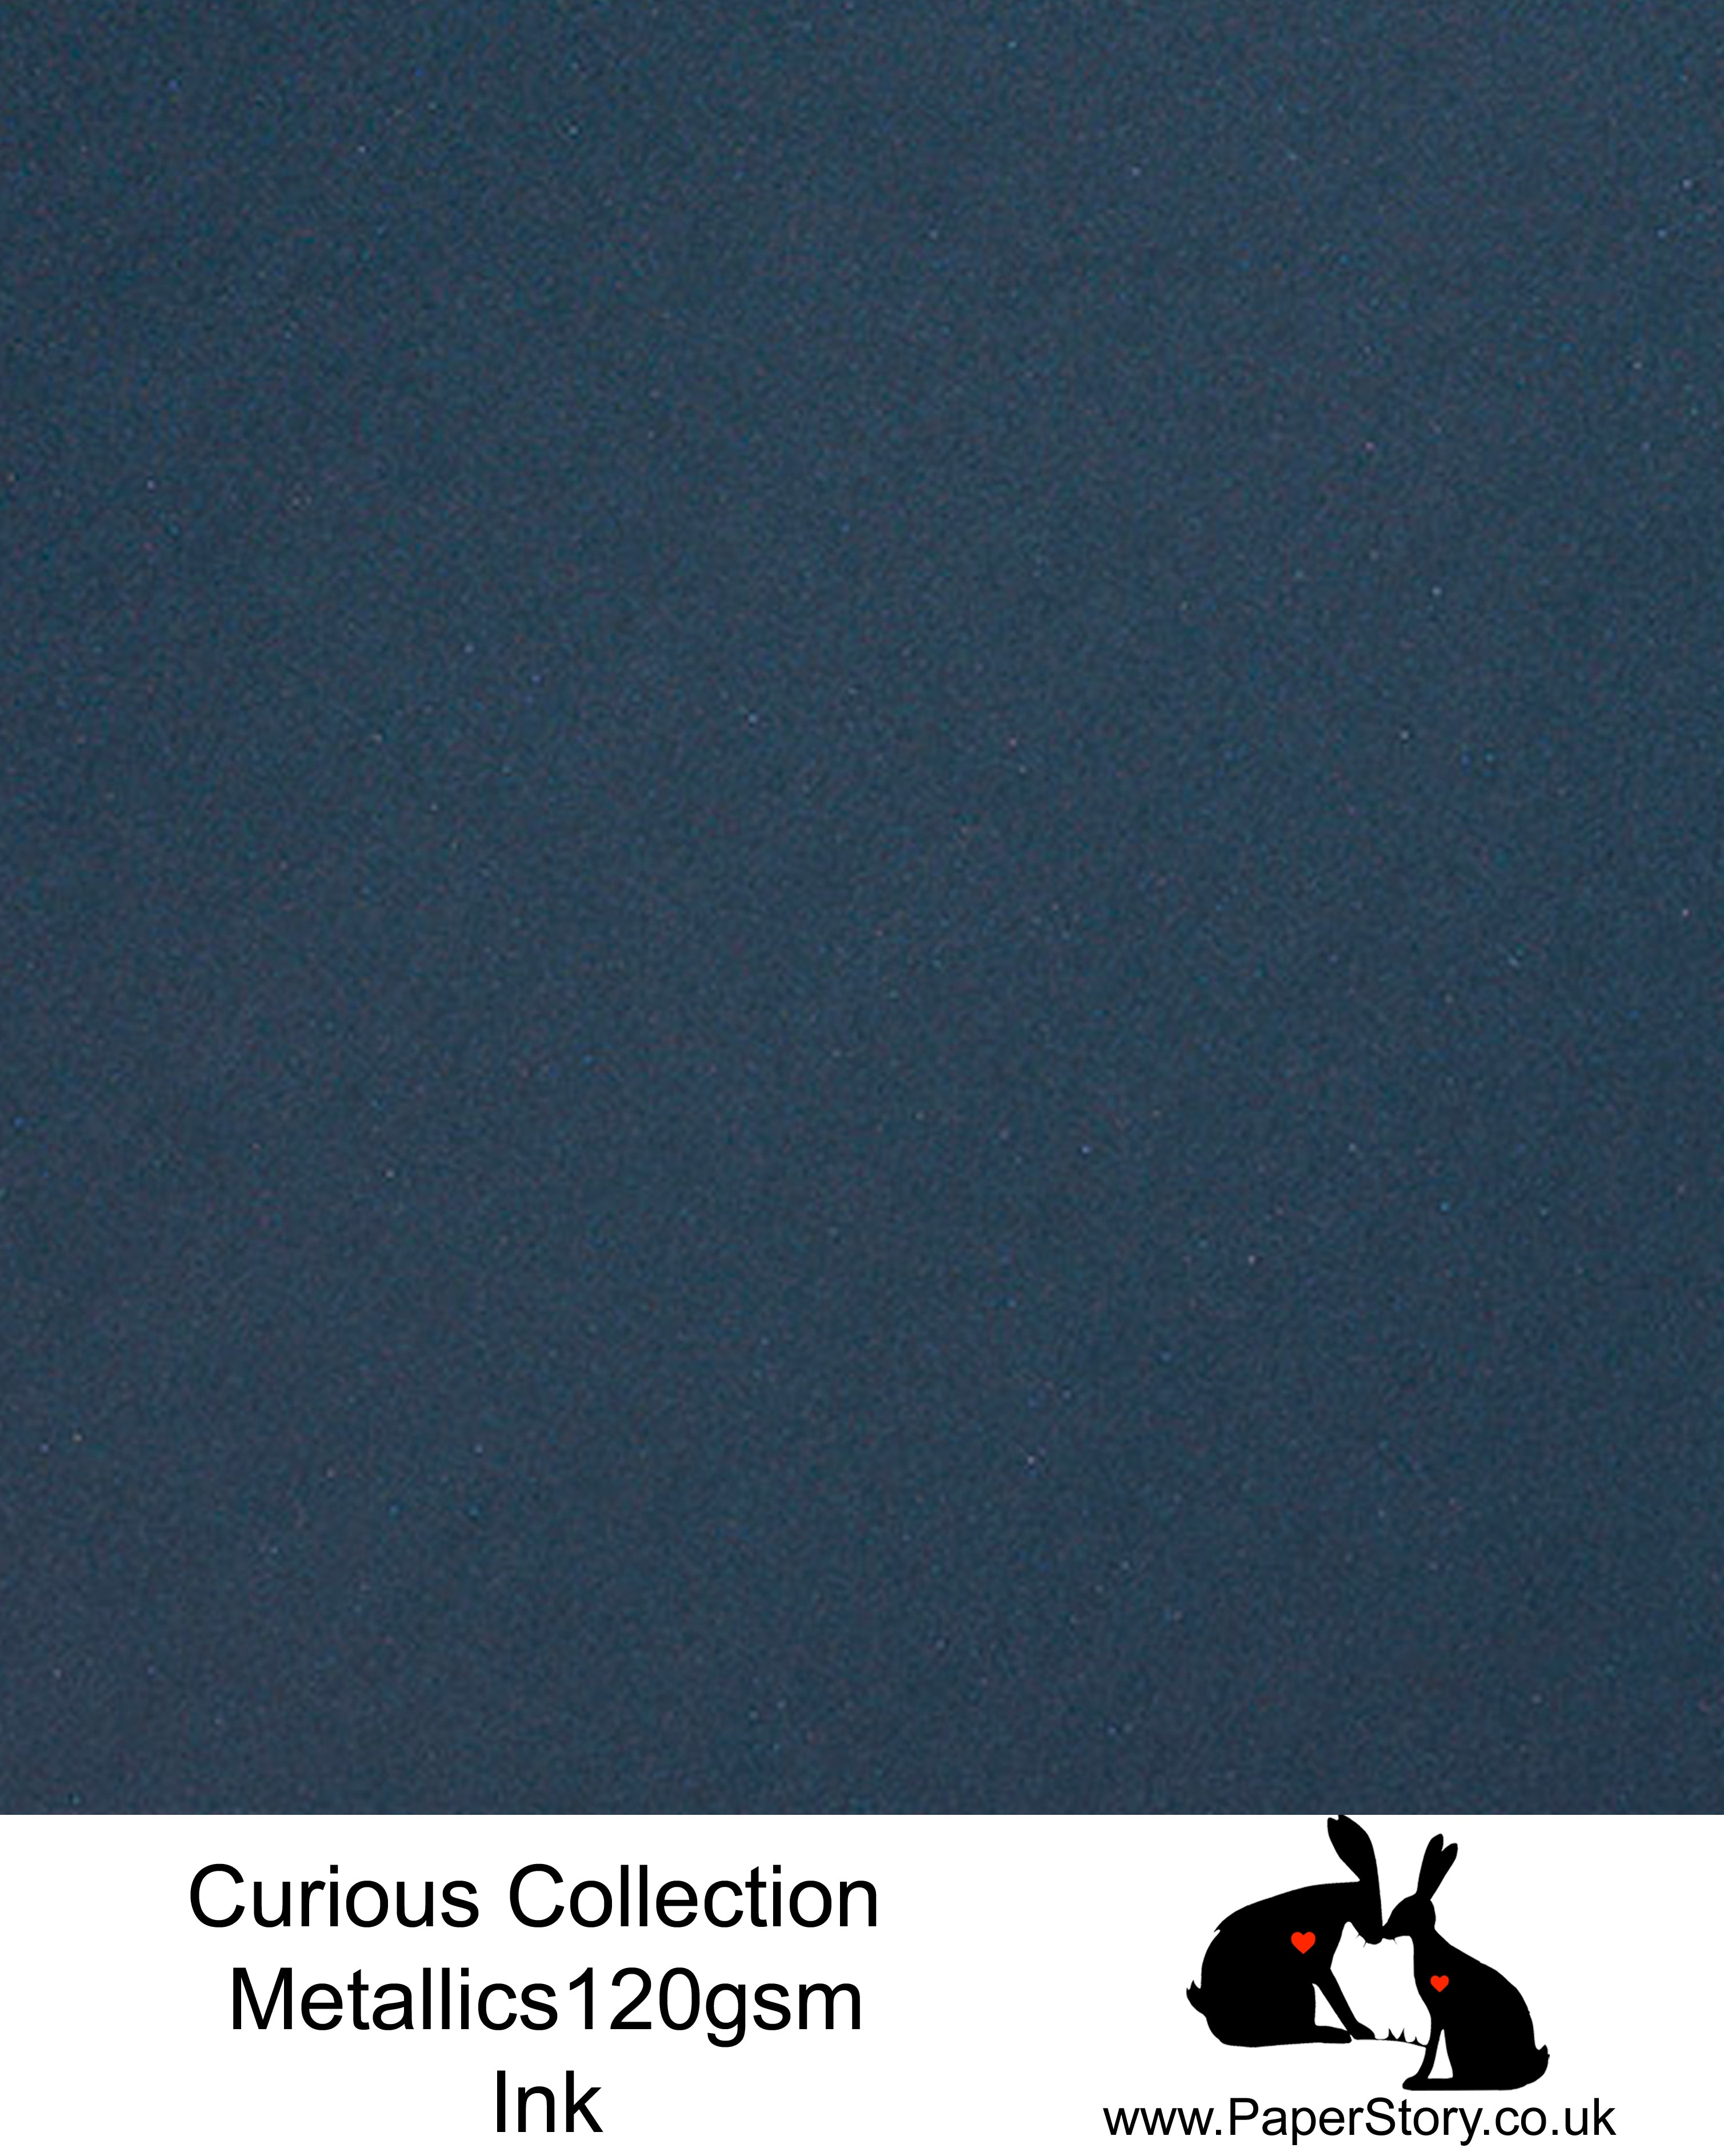 Curious Collection Curious Metallics Ink deep blue Navy colour This unique metallic paper is unlike any other metallic shimmer surface, the natural underlying wove surface of Curious Metallics enhances the stunning metallic shimmer.